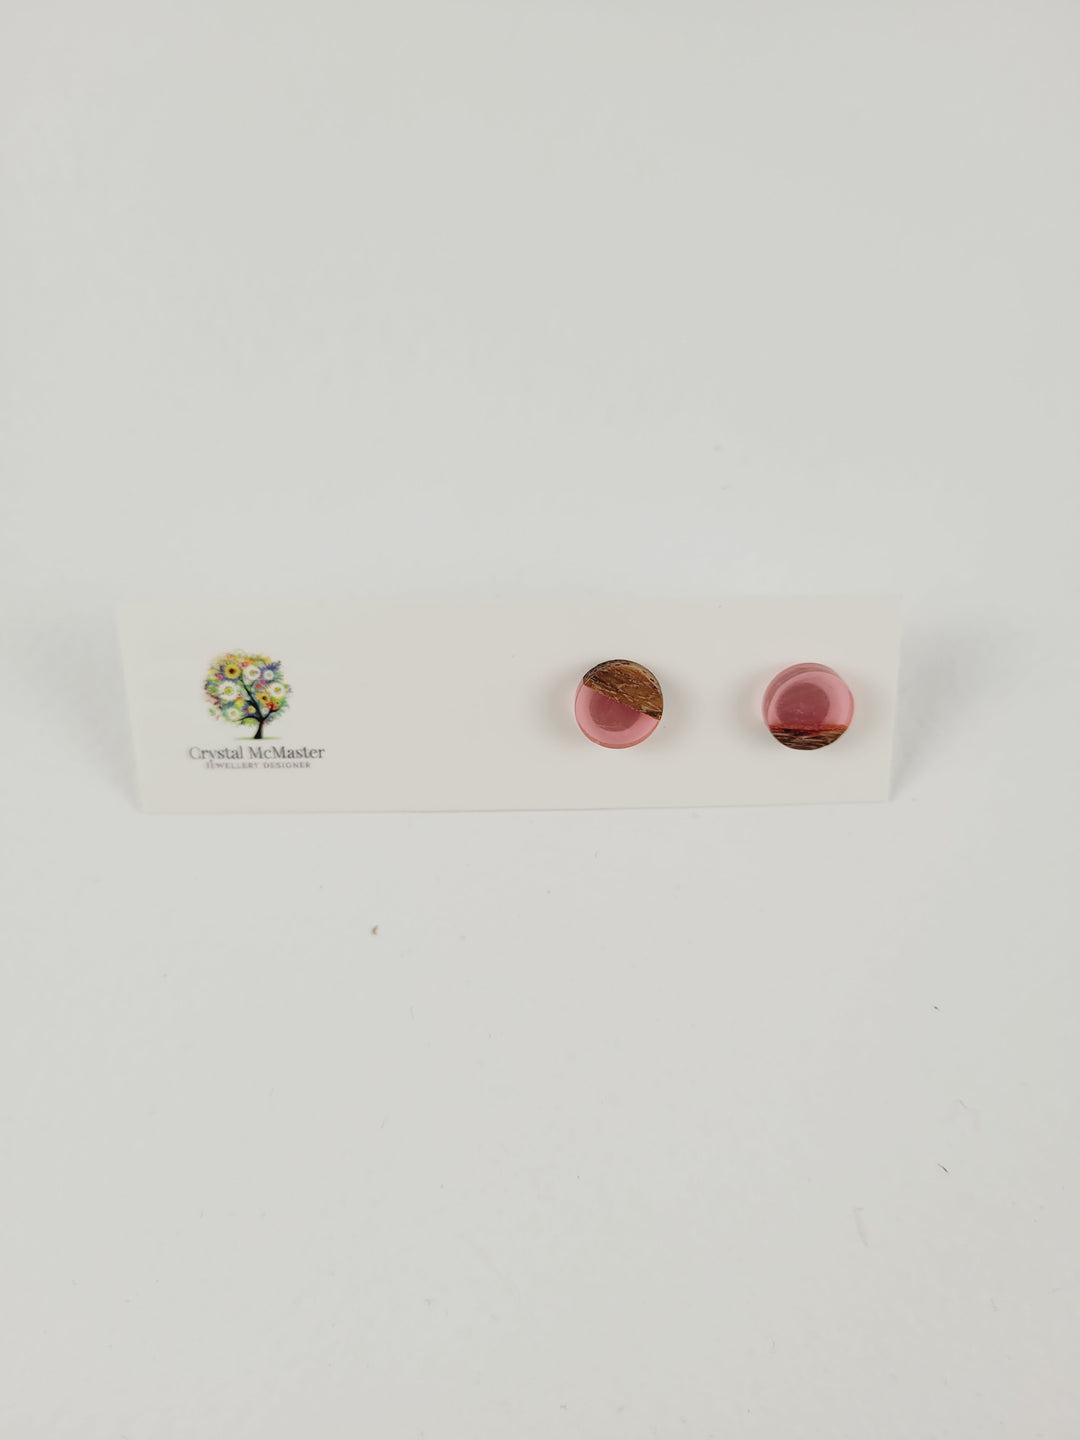 Crystal McMaster, Wood and Resin Studs